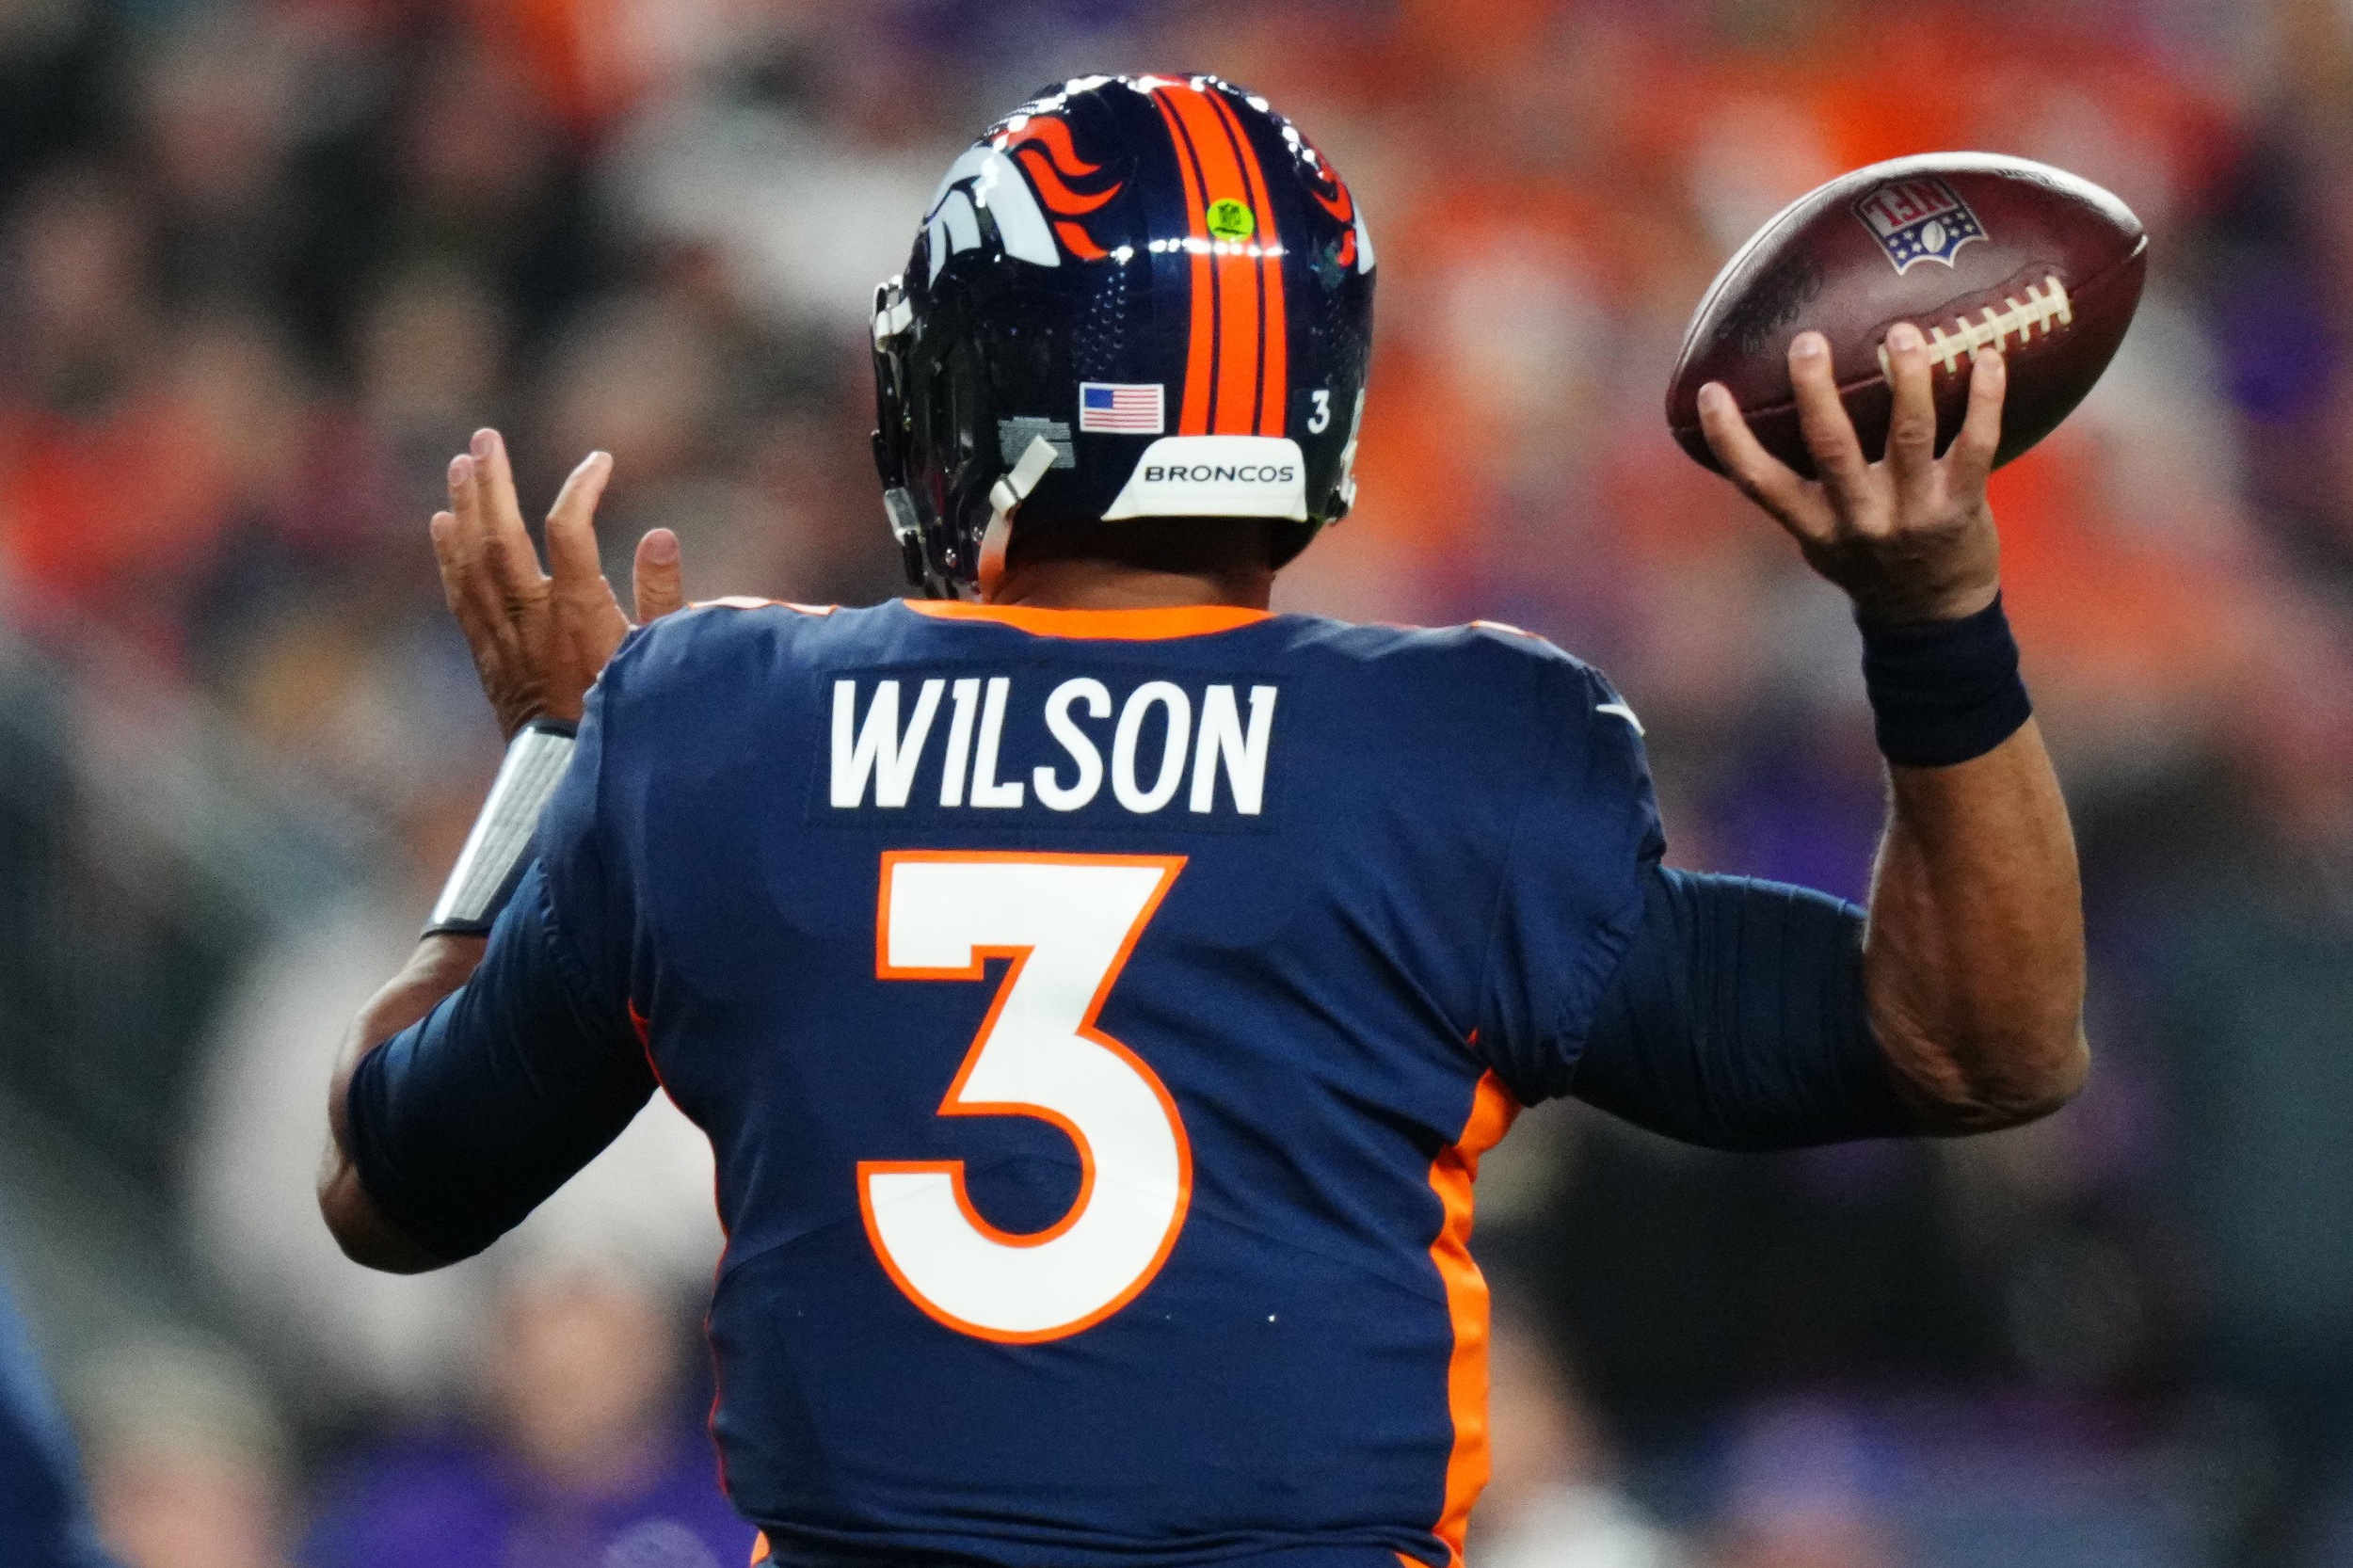 steelers' russell wilson hit with shrewd comment from broncos head coach sean payton